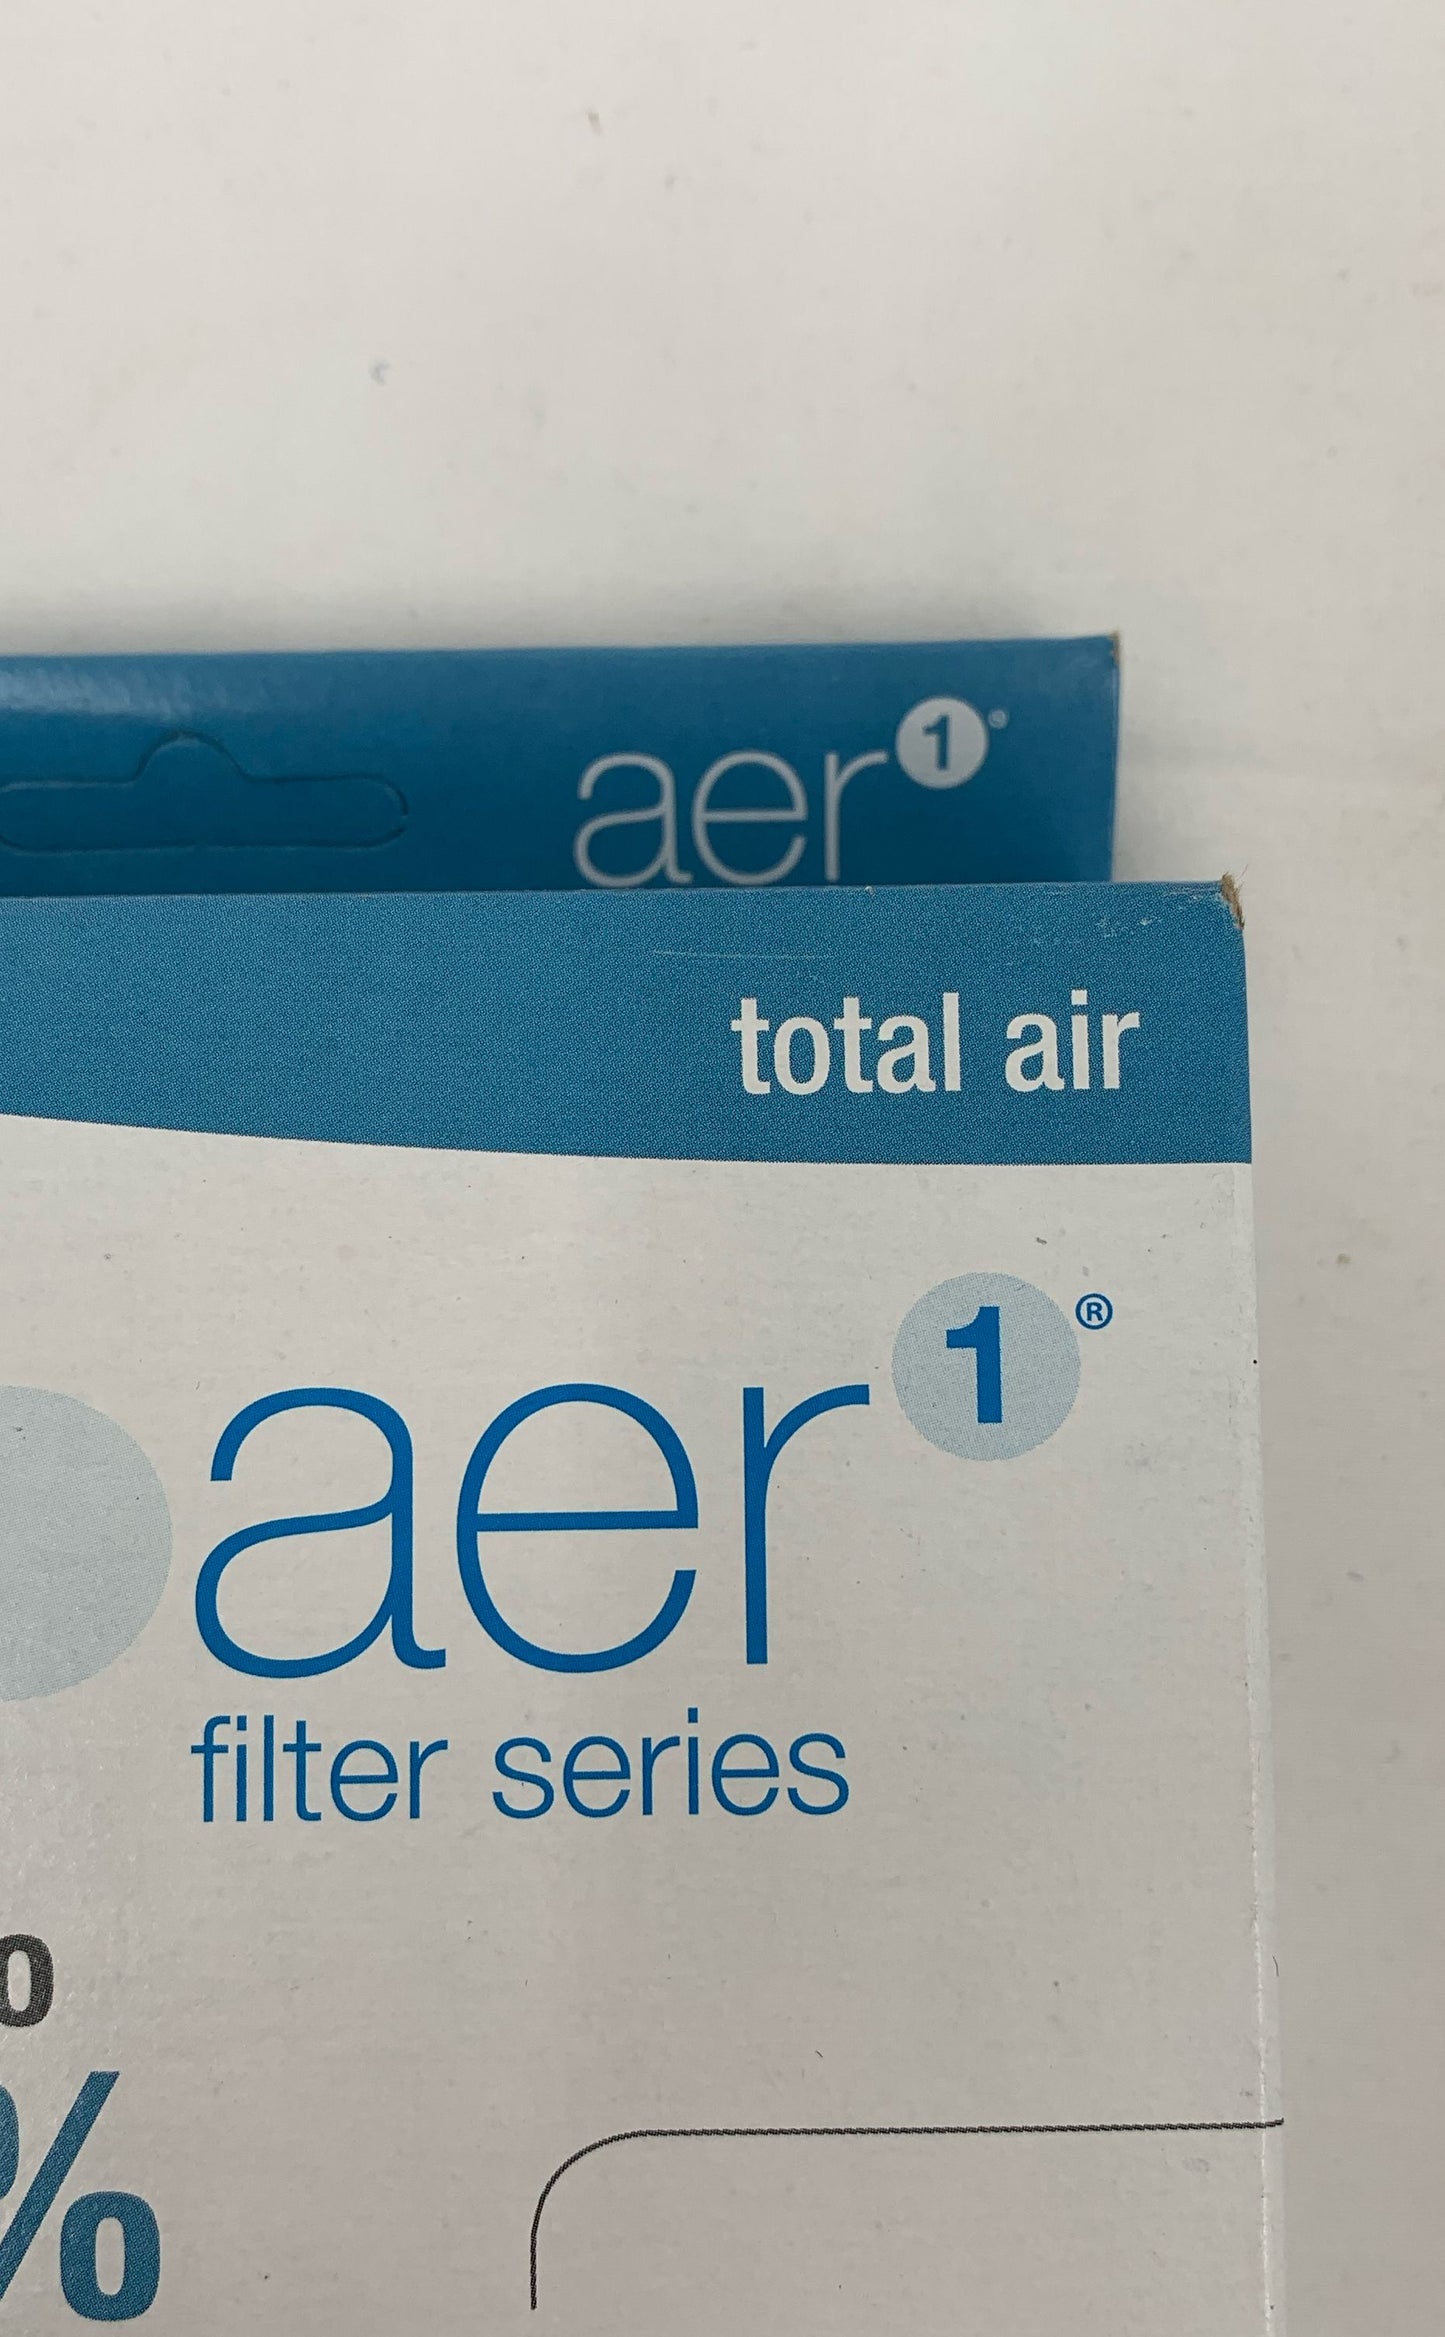 Holmes BionAire Aer1 Total Air Hepa Filter A-HAPF3030 Boxed & Sealed Lot Of 4